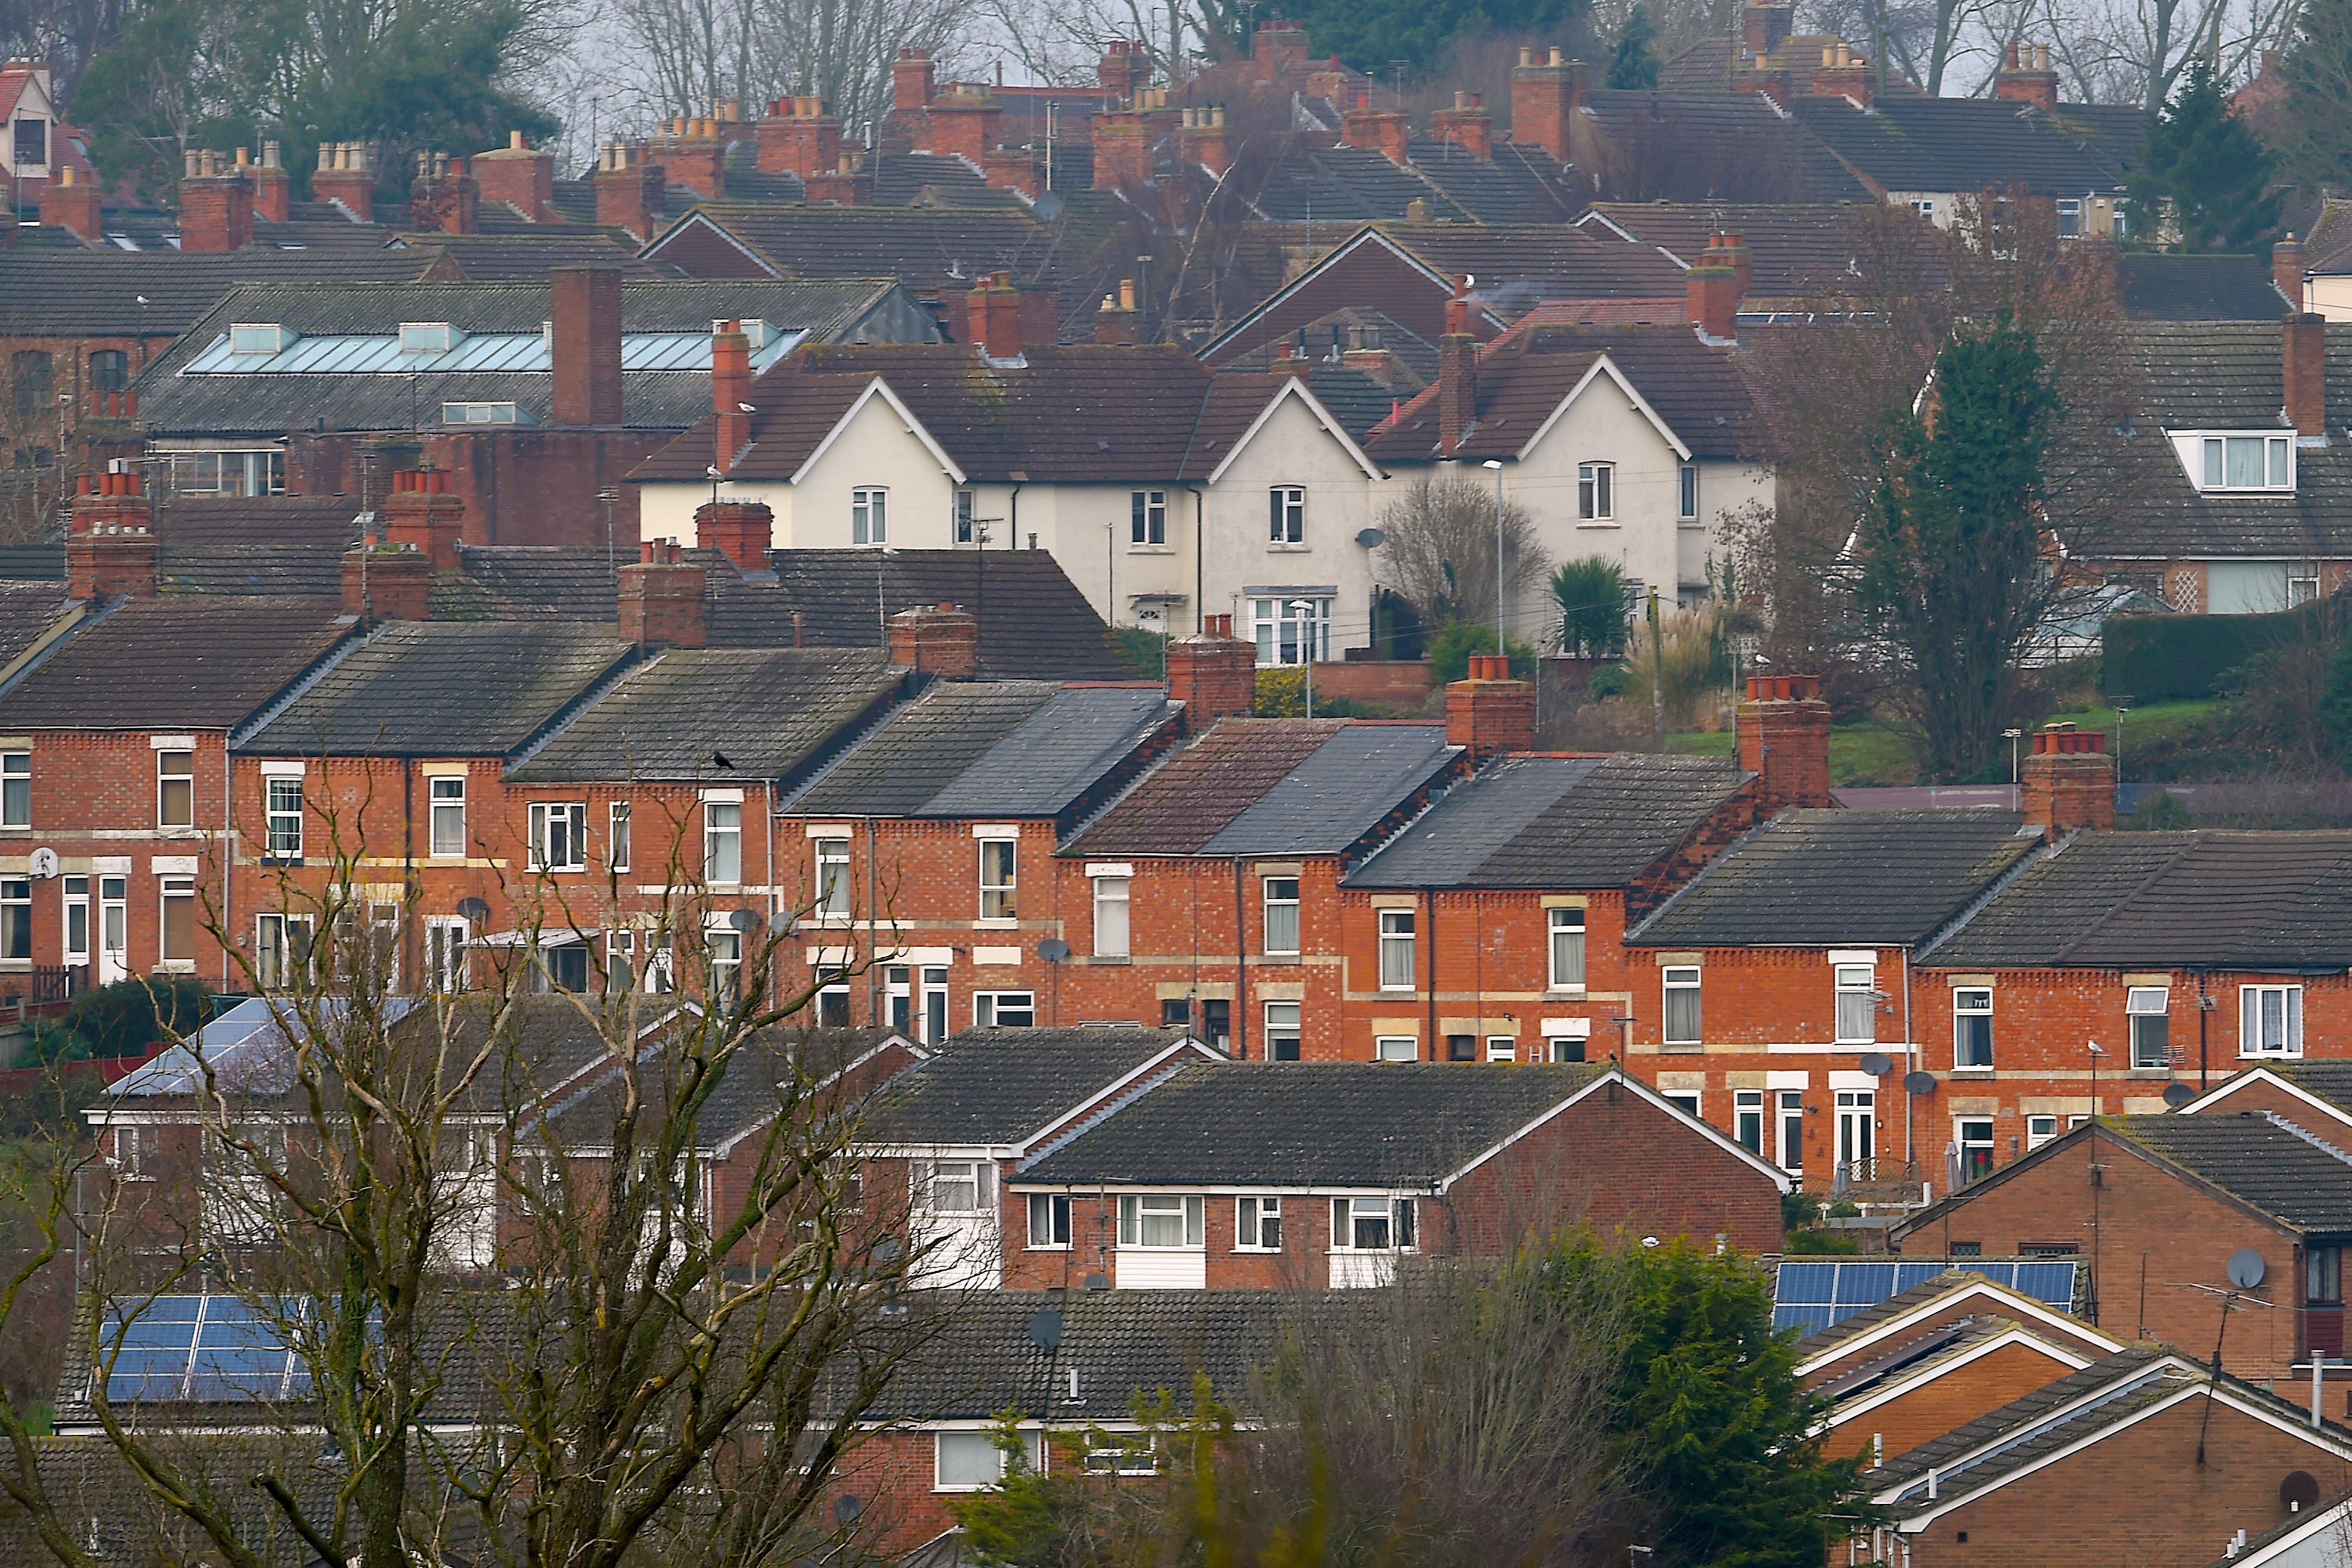 House prices are still climbing in Scotland and Northern Ireland